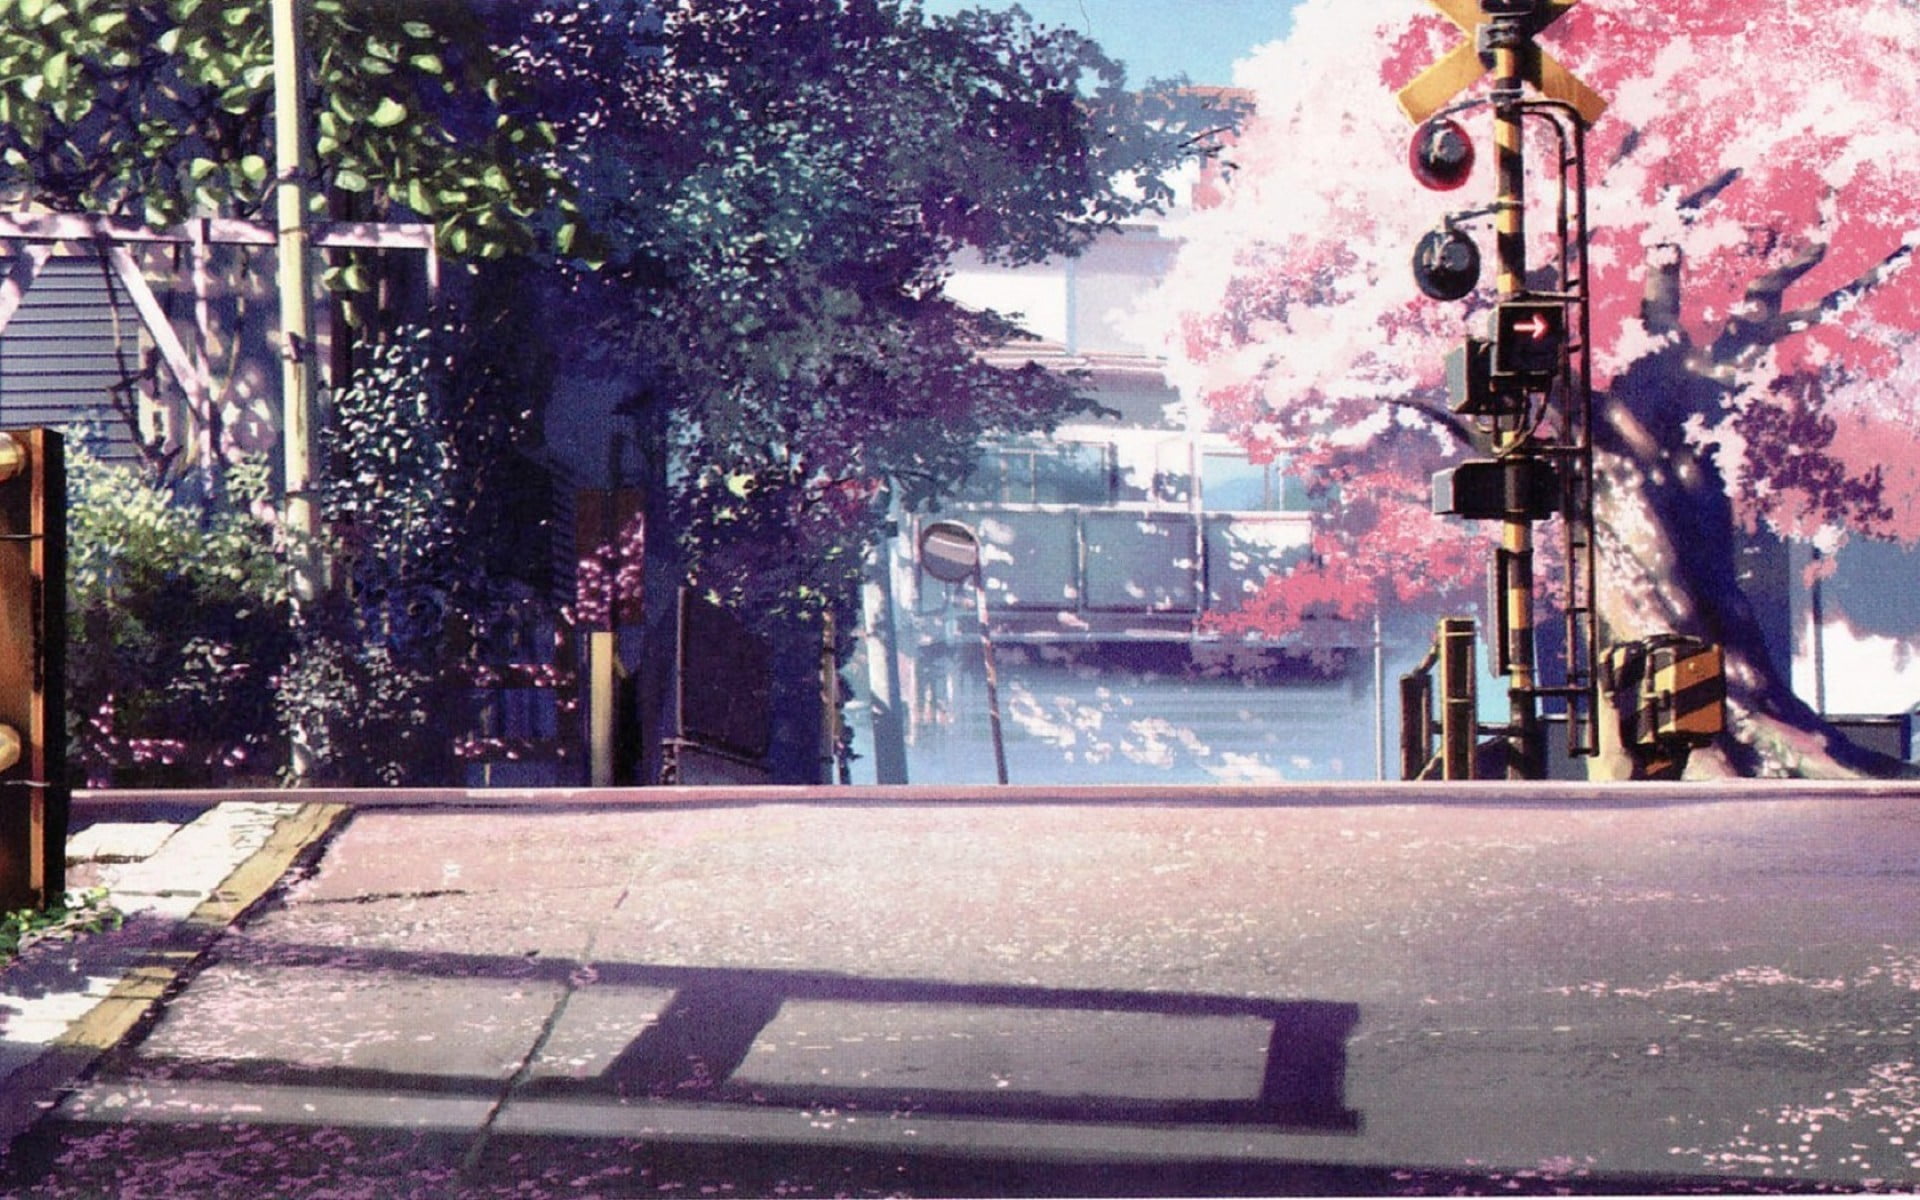 5 Centimeters Per Second 2007 A Gorgeously Rendered Tale of Young Love   Yearning Desires  High On Films